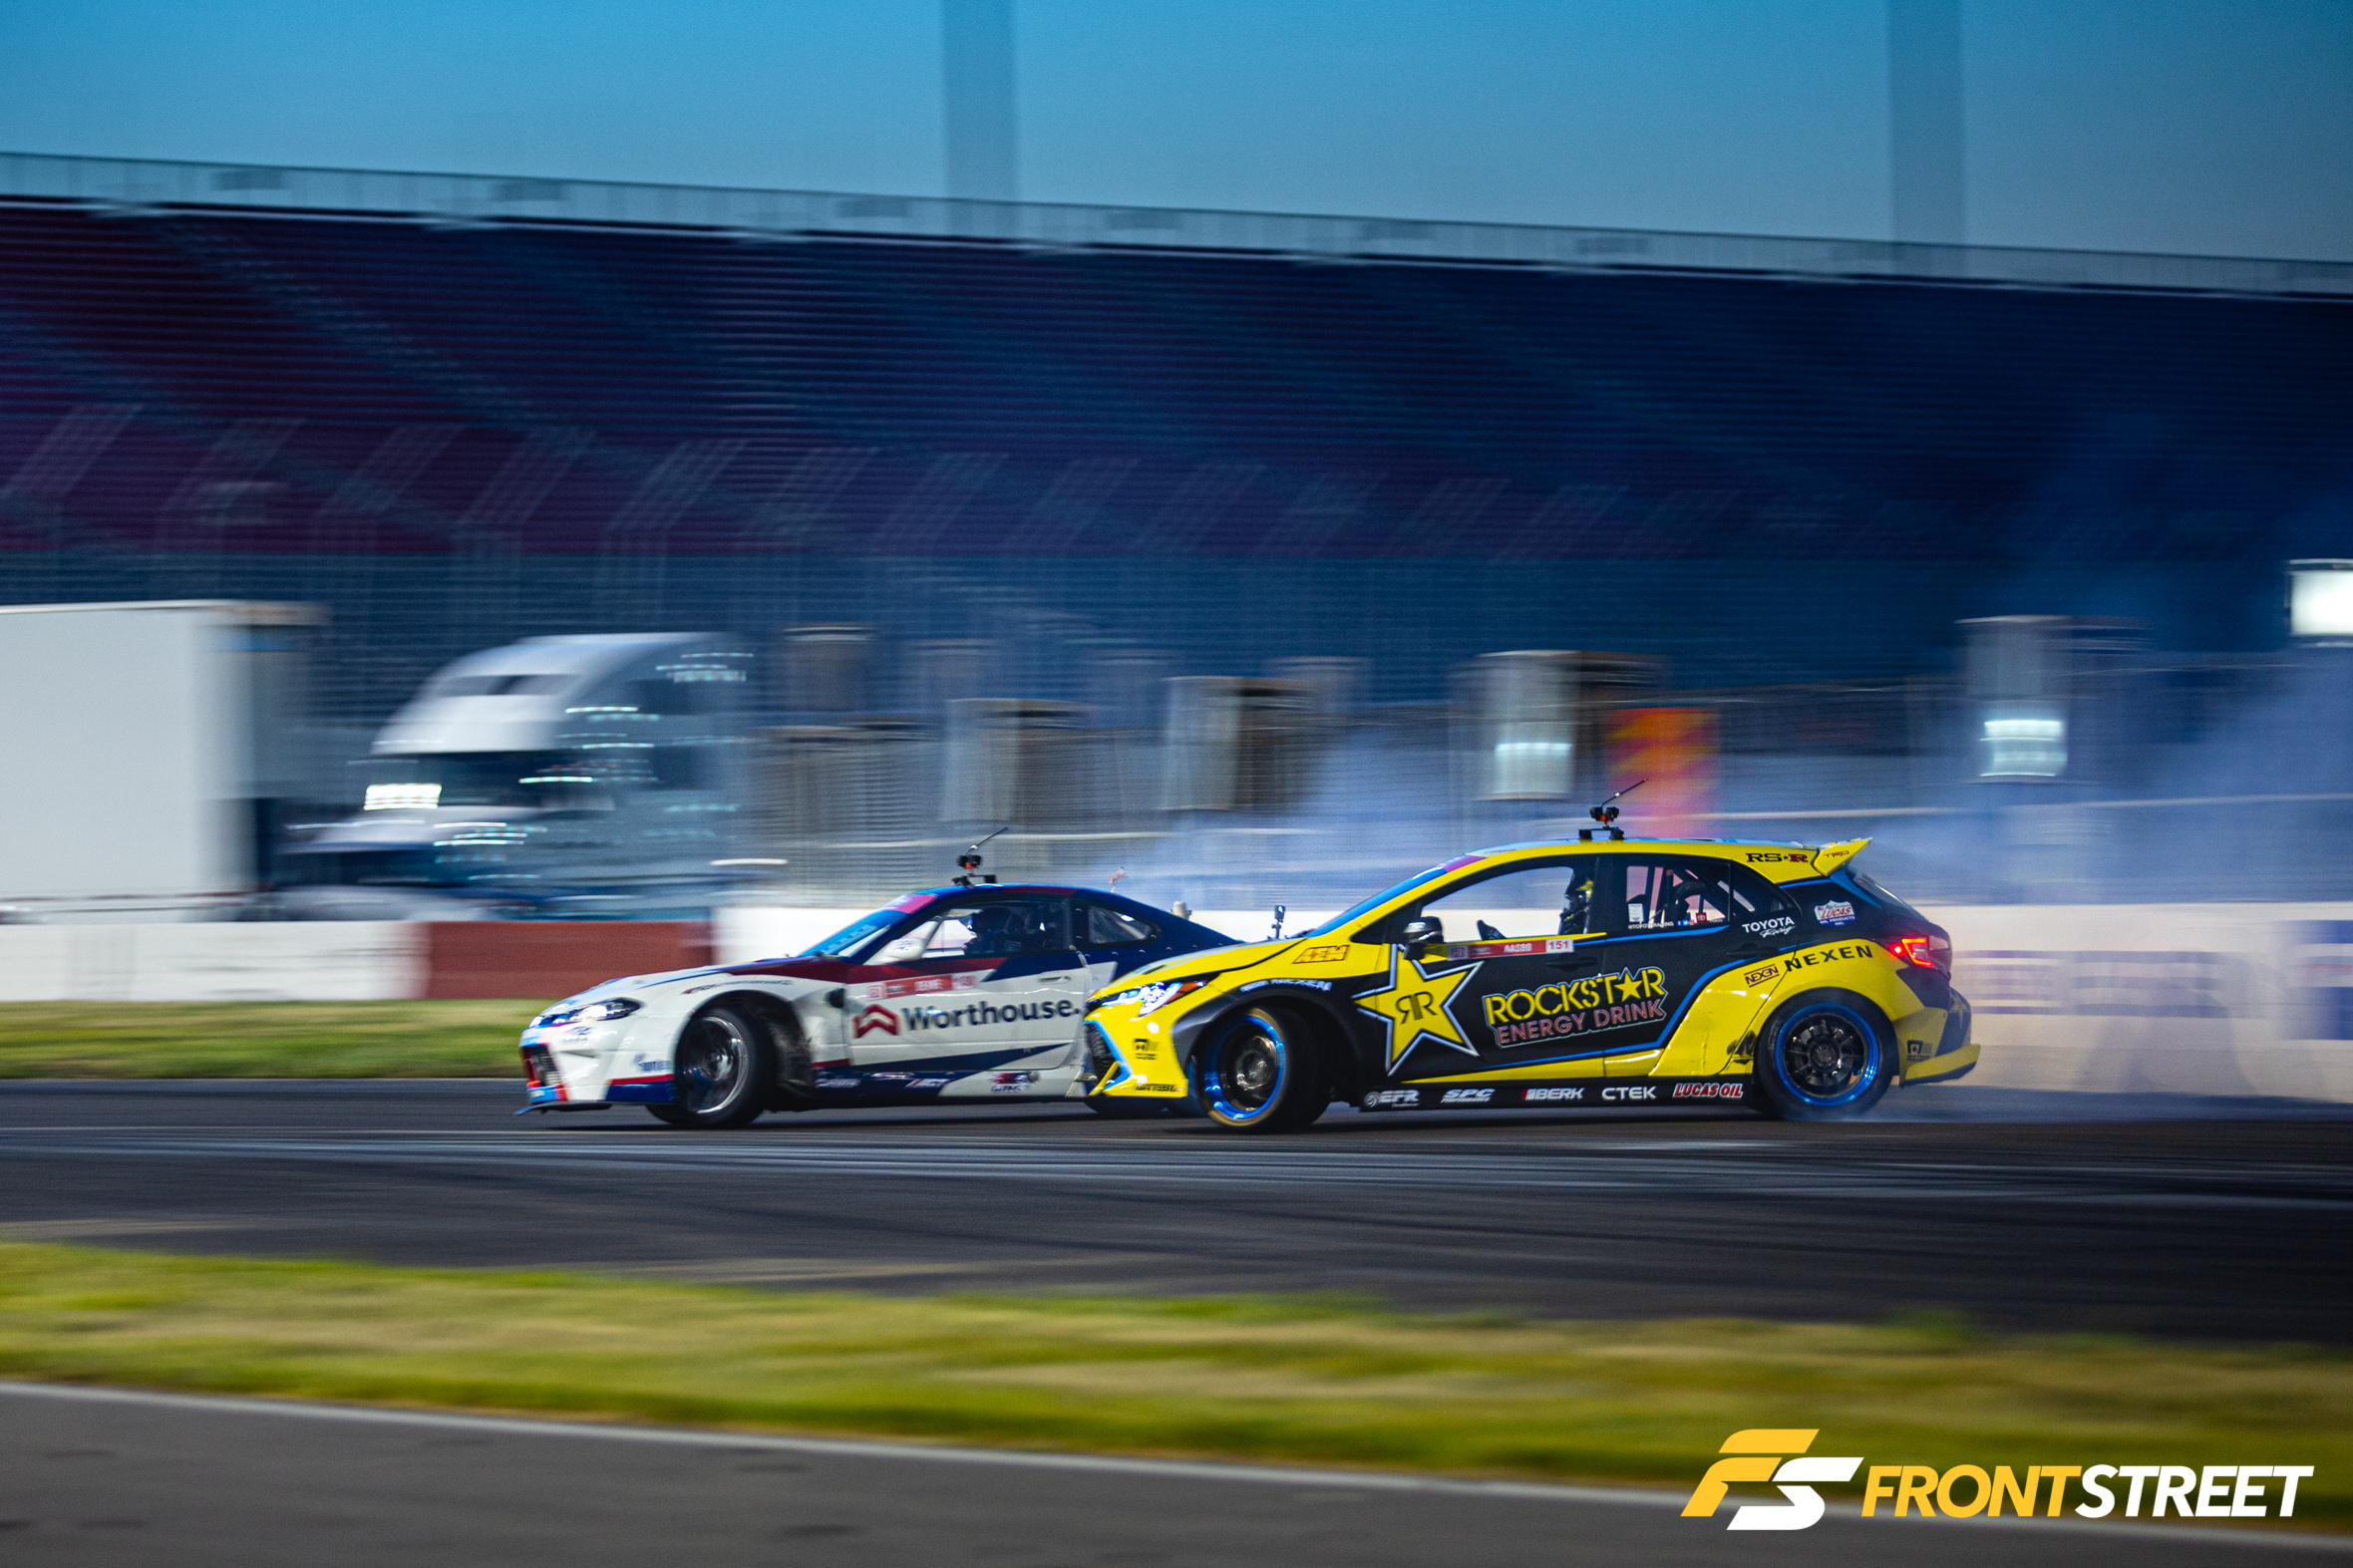 Why Formula Drift St. Louis In 2019 Was So Pivotal For The Season